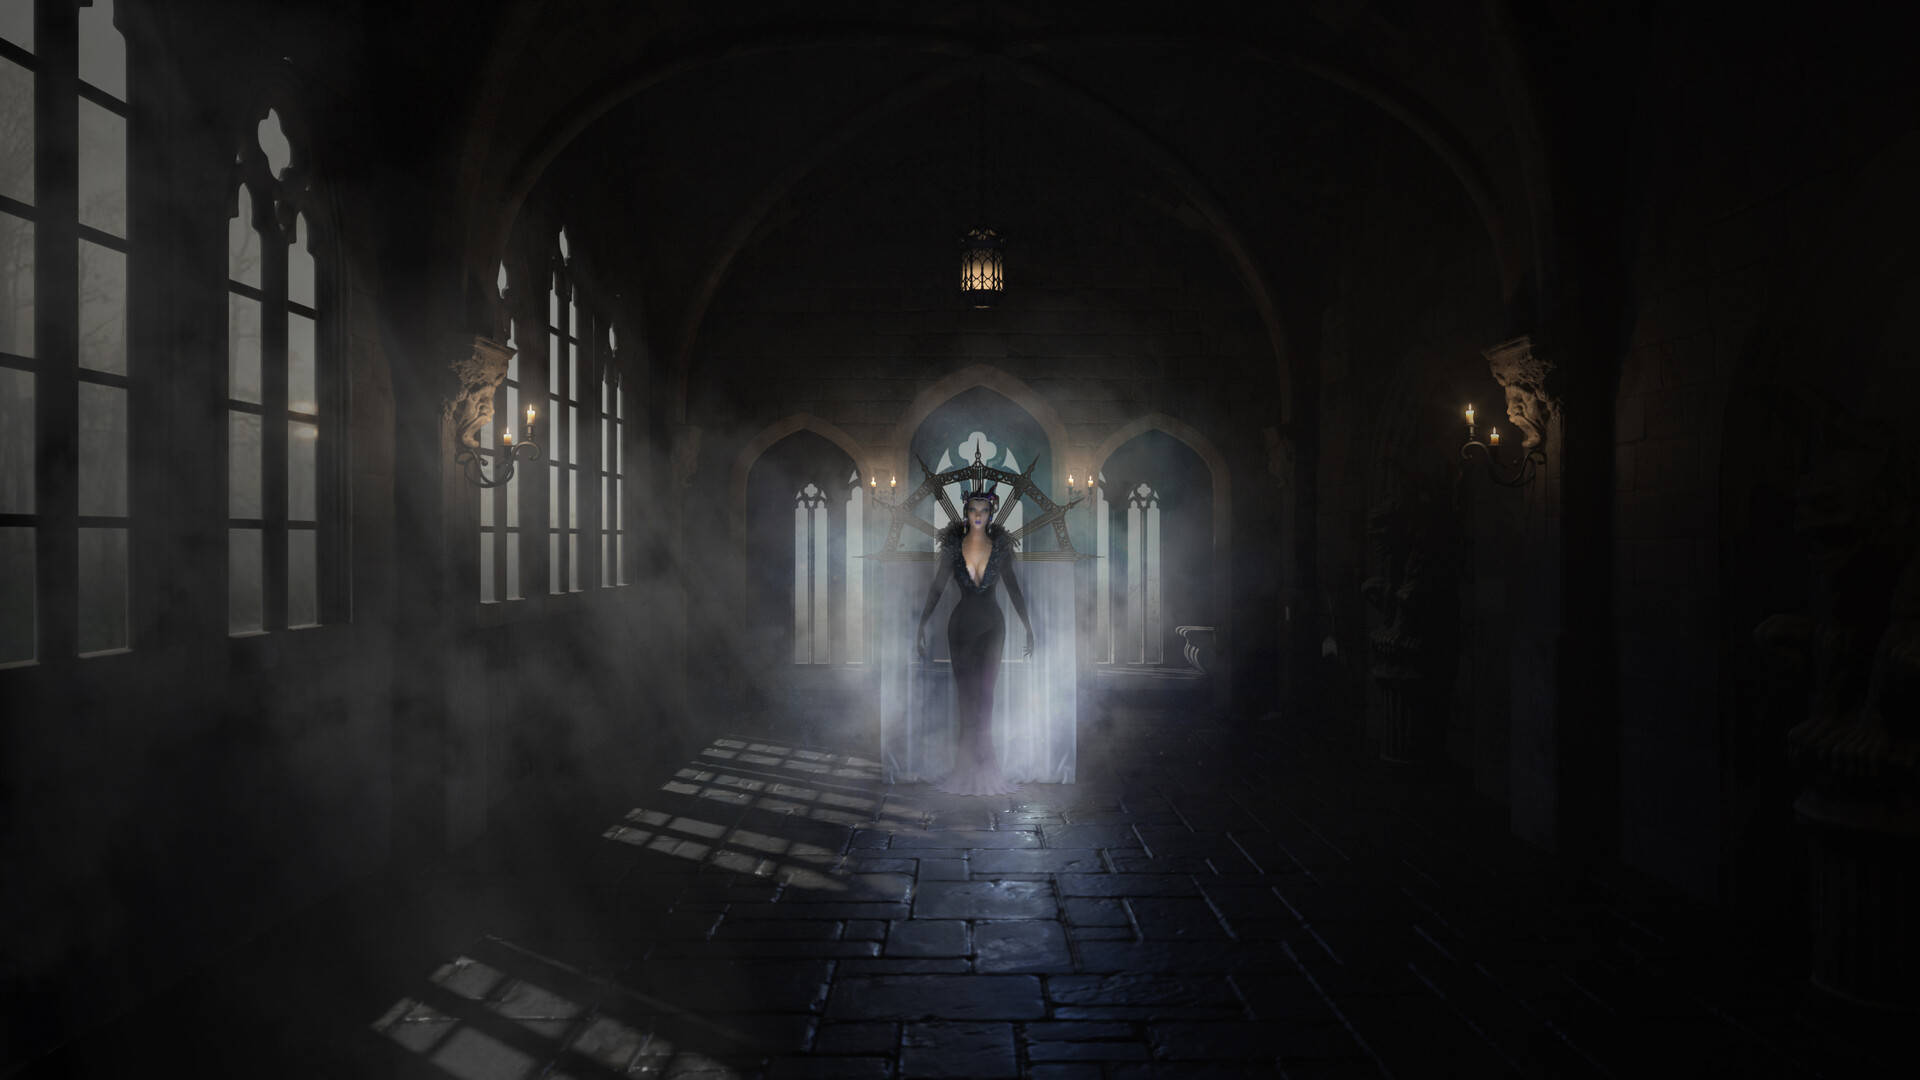 The Mystical Ultimecia Castle from Final Fantasy 8 Wallpaper